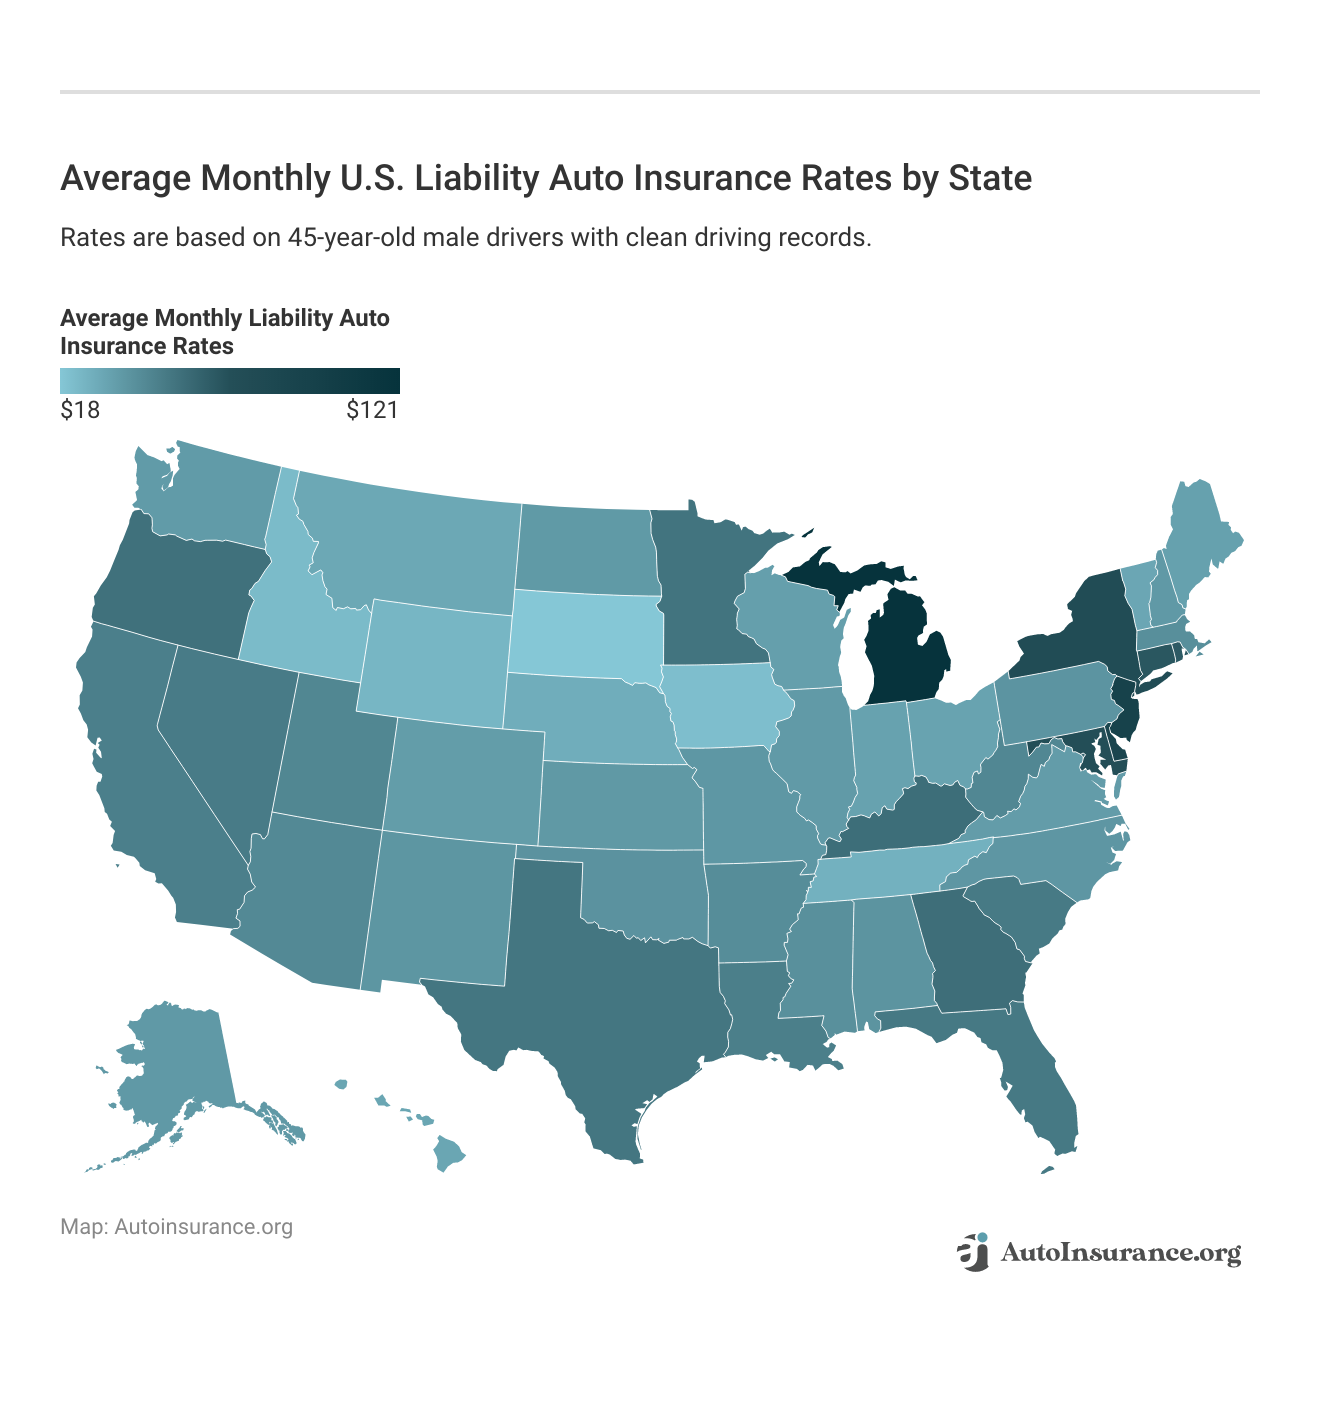 <h3>Average Monthly U.S. Liability Auto Insurance Rates by State</h3>